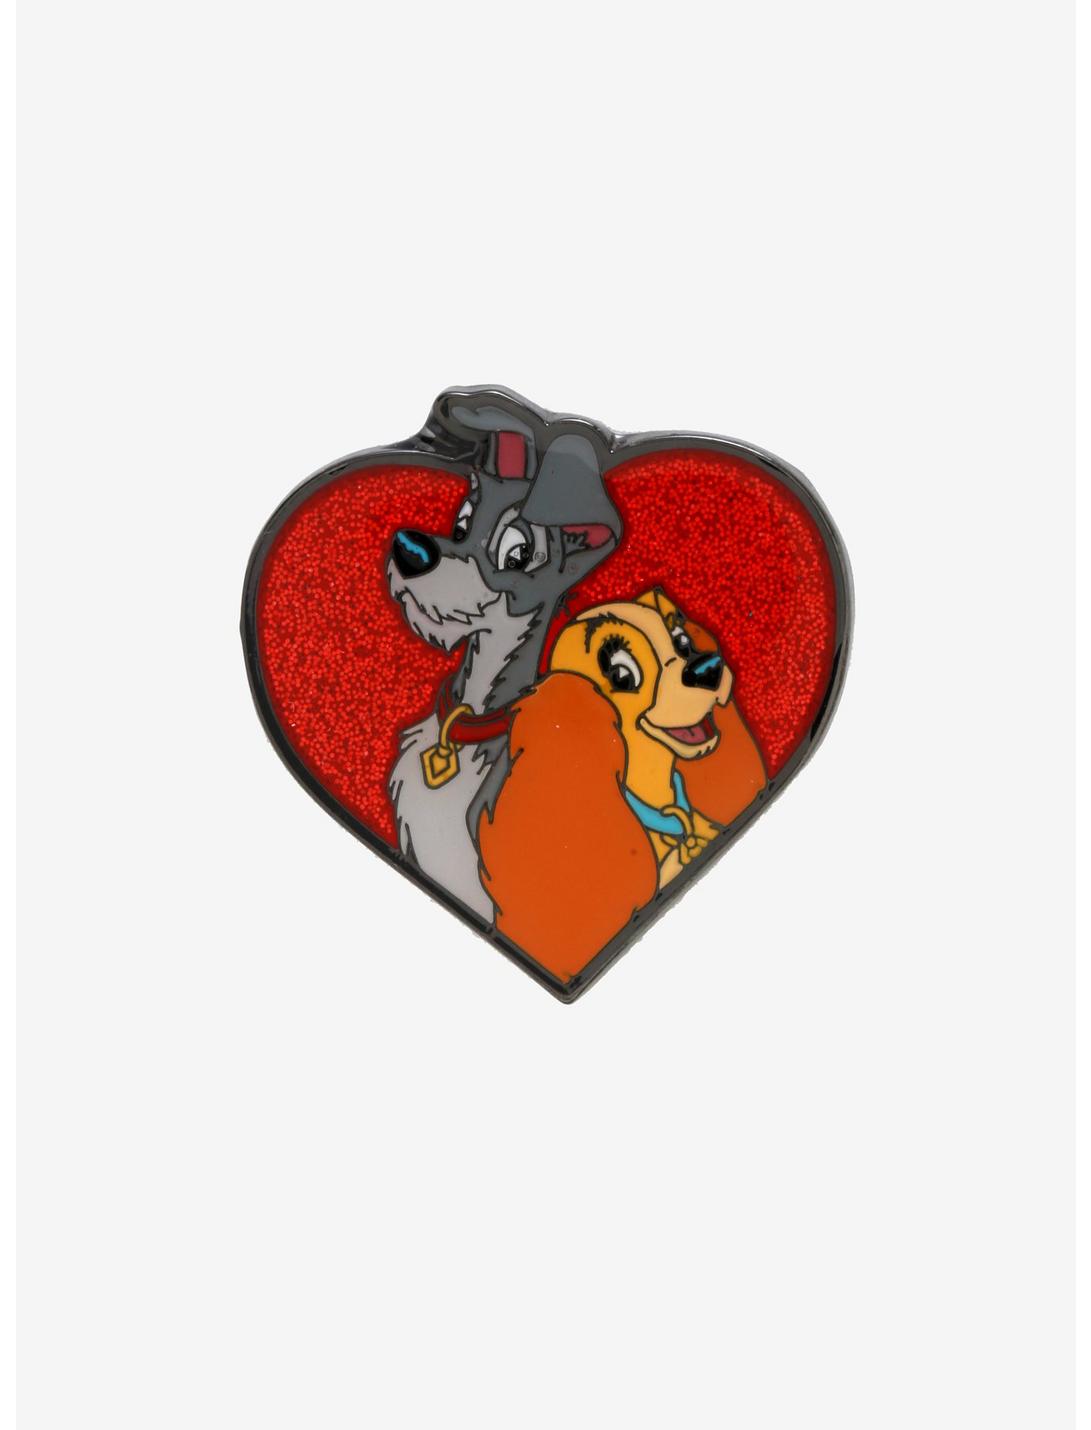 Loungefly Disney Lady And The Tramp Glitter Heart Enamel Pin, , hi-res